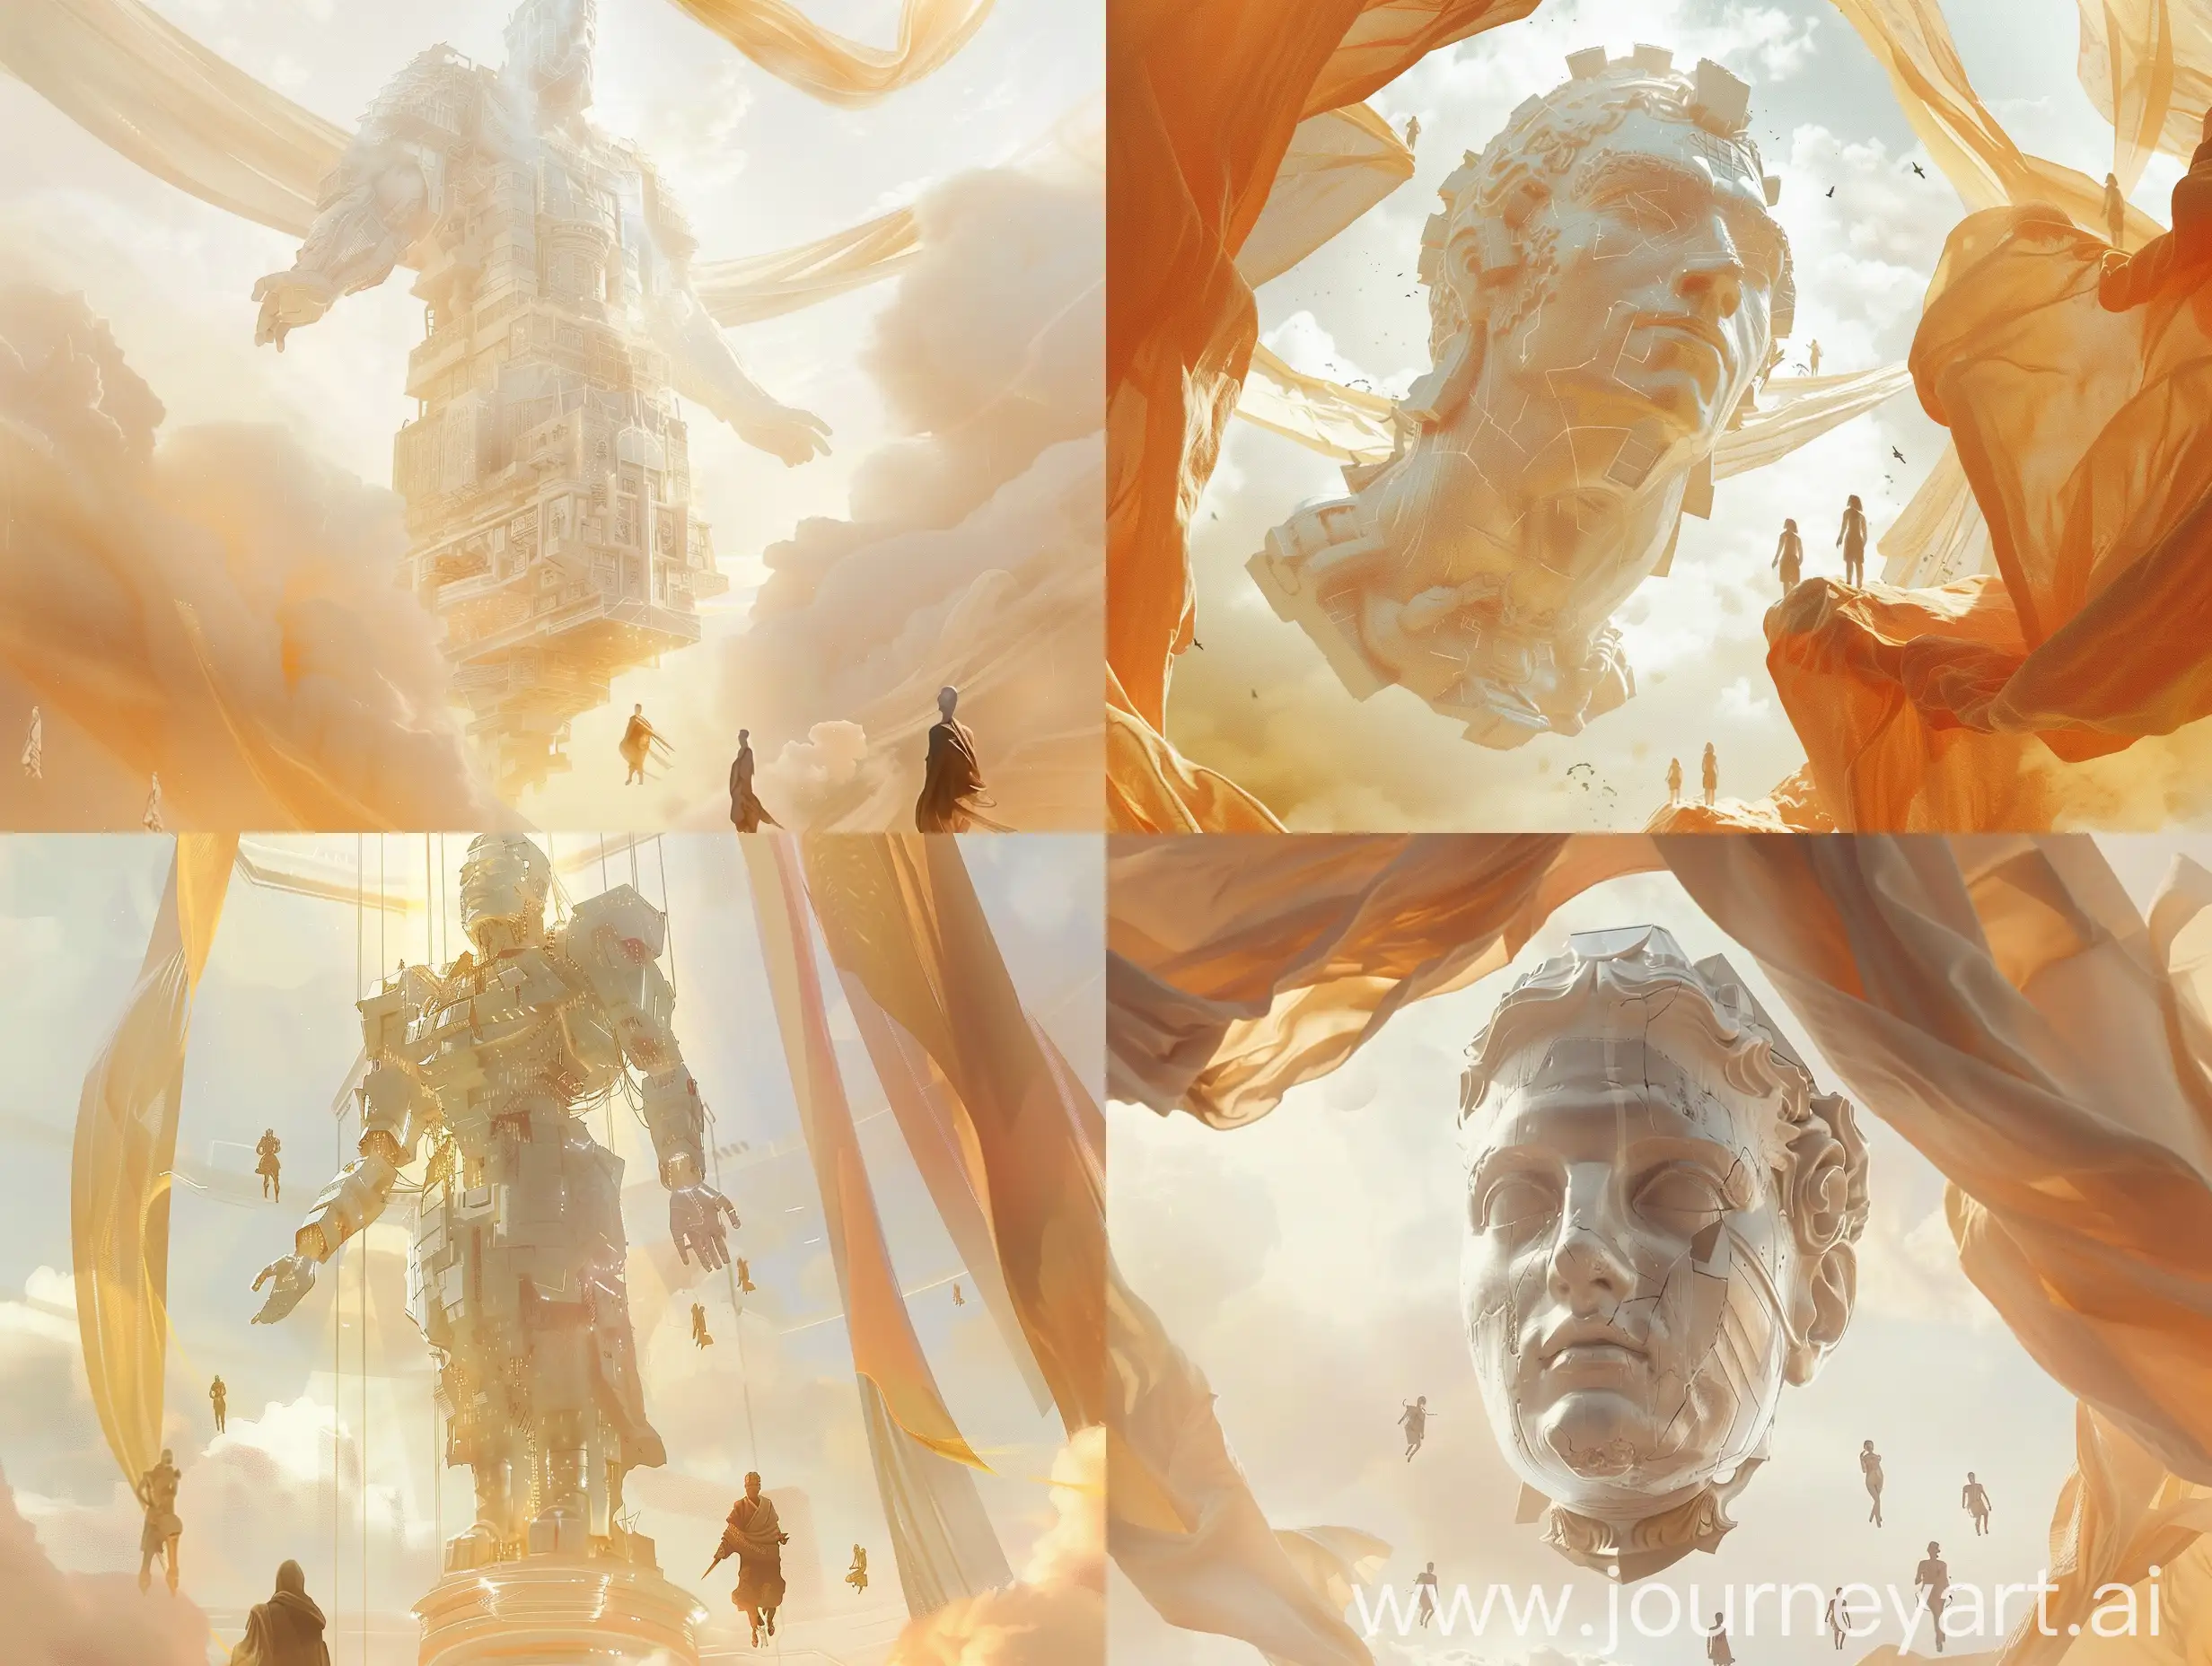 Floatin,colosl,futuristic statue in the sky,awe-inspiring and serene,in the style of Stuart Lippincot:2,with detailed composition and subtle geometric elements.This sanctuary-like atmosphere features crisp clarity and soft amber tones.n contrast.tiny human figures suound the statue,The piece incorporates flowing draperies.reminiscent of Shwedoff and Philip McKay s styles,emphasizing thejuxtaposition between the powerful presence of the statue and thevulnerability of the minuscule human figures shwedoff